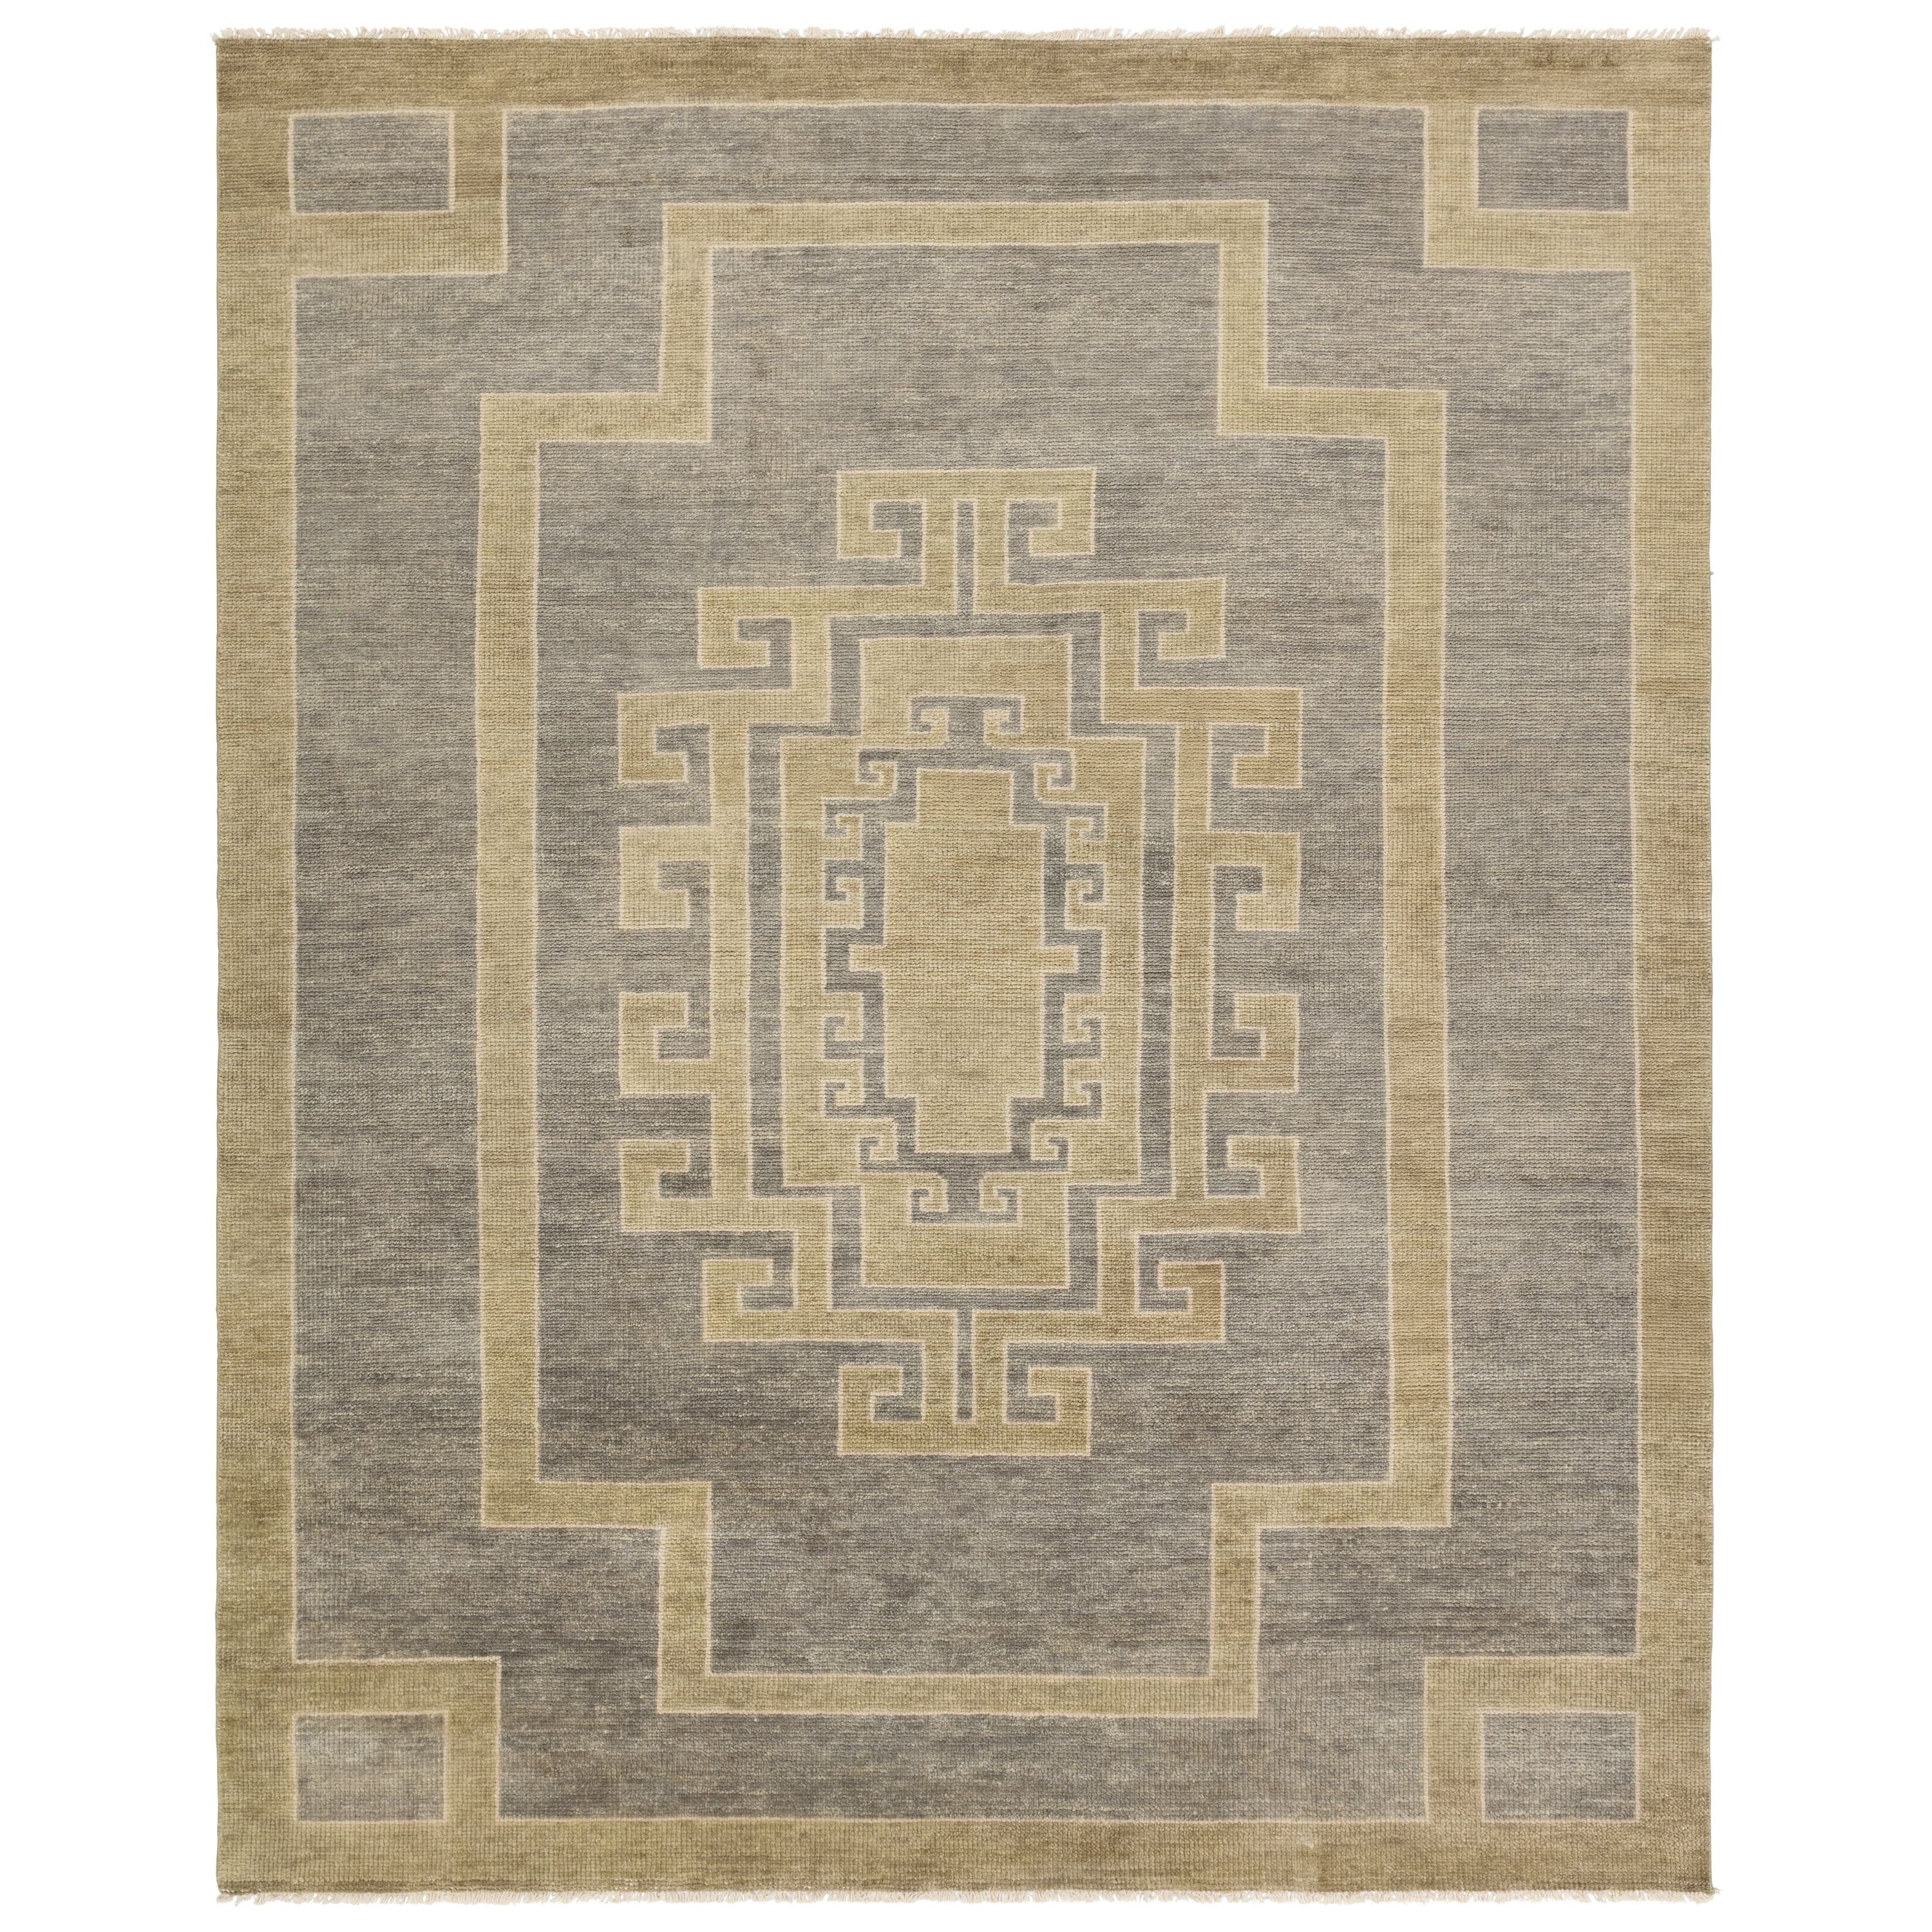 The hand-knotted Cyprus collection showcases a modern representation of vintage Kars designs with clean-lined geometric details and fresh colorways. The gray, sage, and cream Kyrenia design delights with an antique medallion pattern and a similarly styled border. Low pile and naturally stain resistant fibers allow for easy care and cleanup. Amethyst Home provides interior design, new construction, custom furniture, and area rugs in the Tampa metro area.